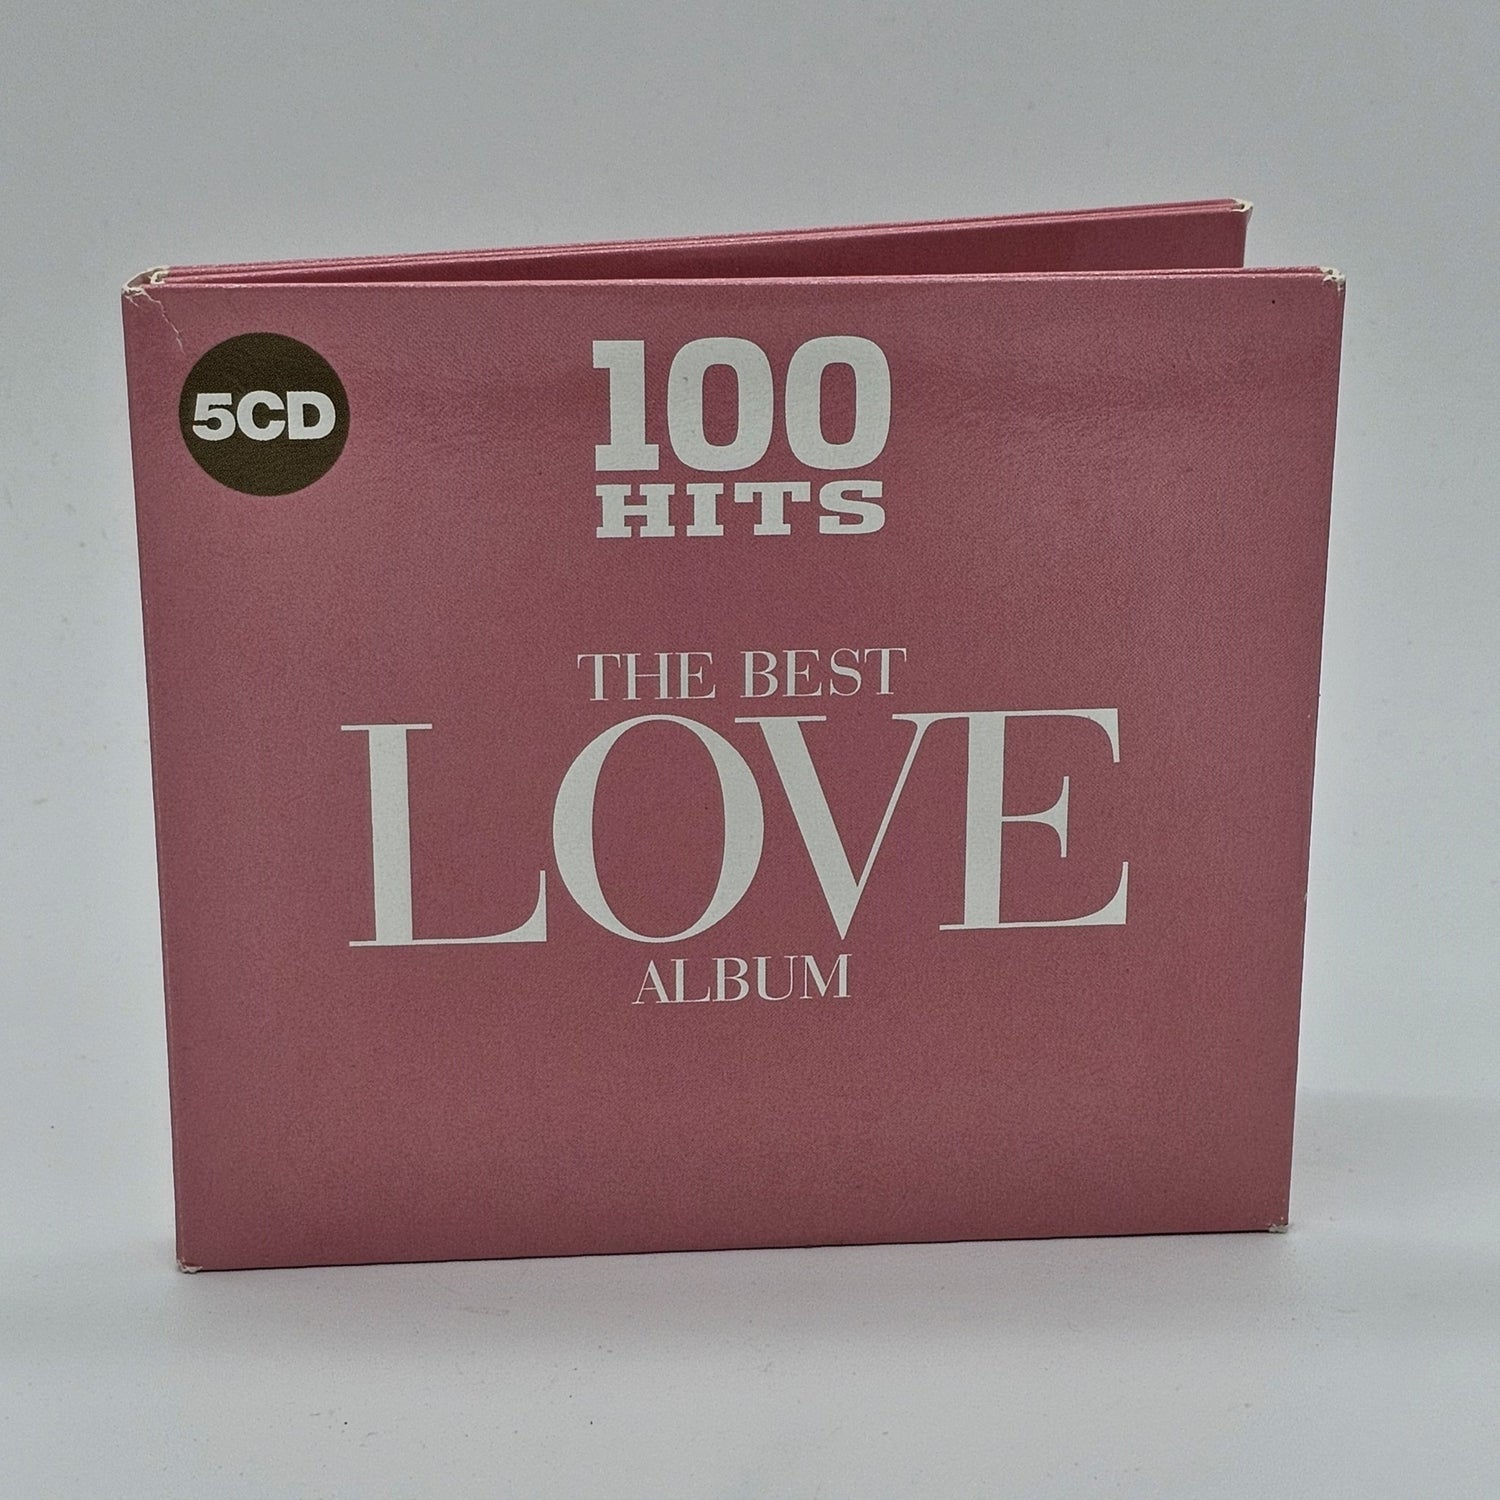 Sony Music - 100 Hits | The Best Love Album | 5 CD Set - Compact Disc - Steady Bunny Shop